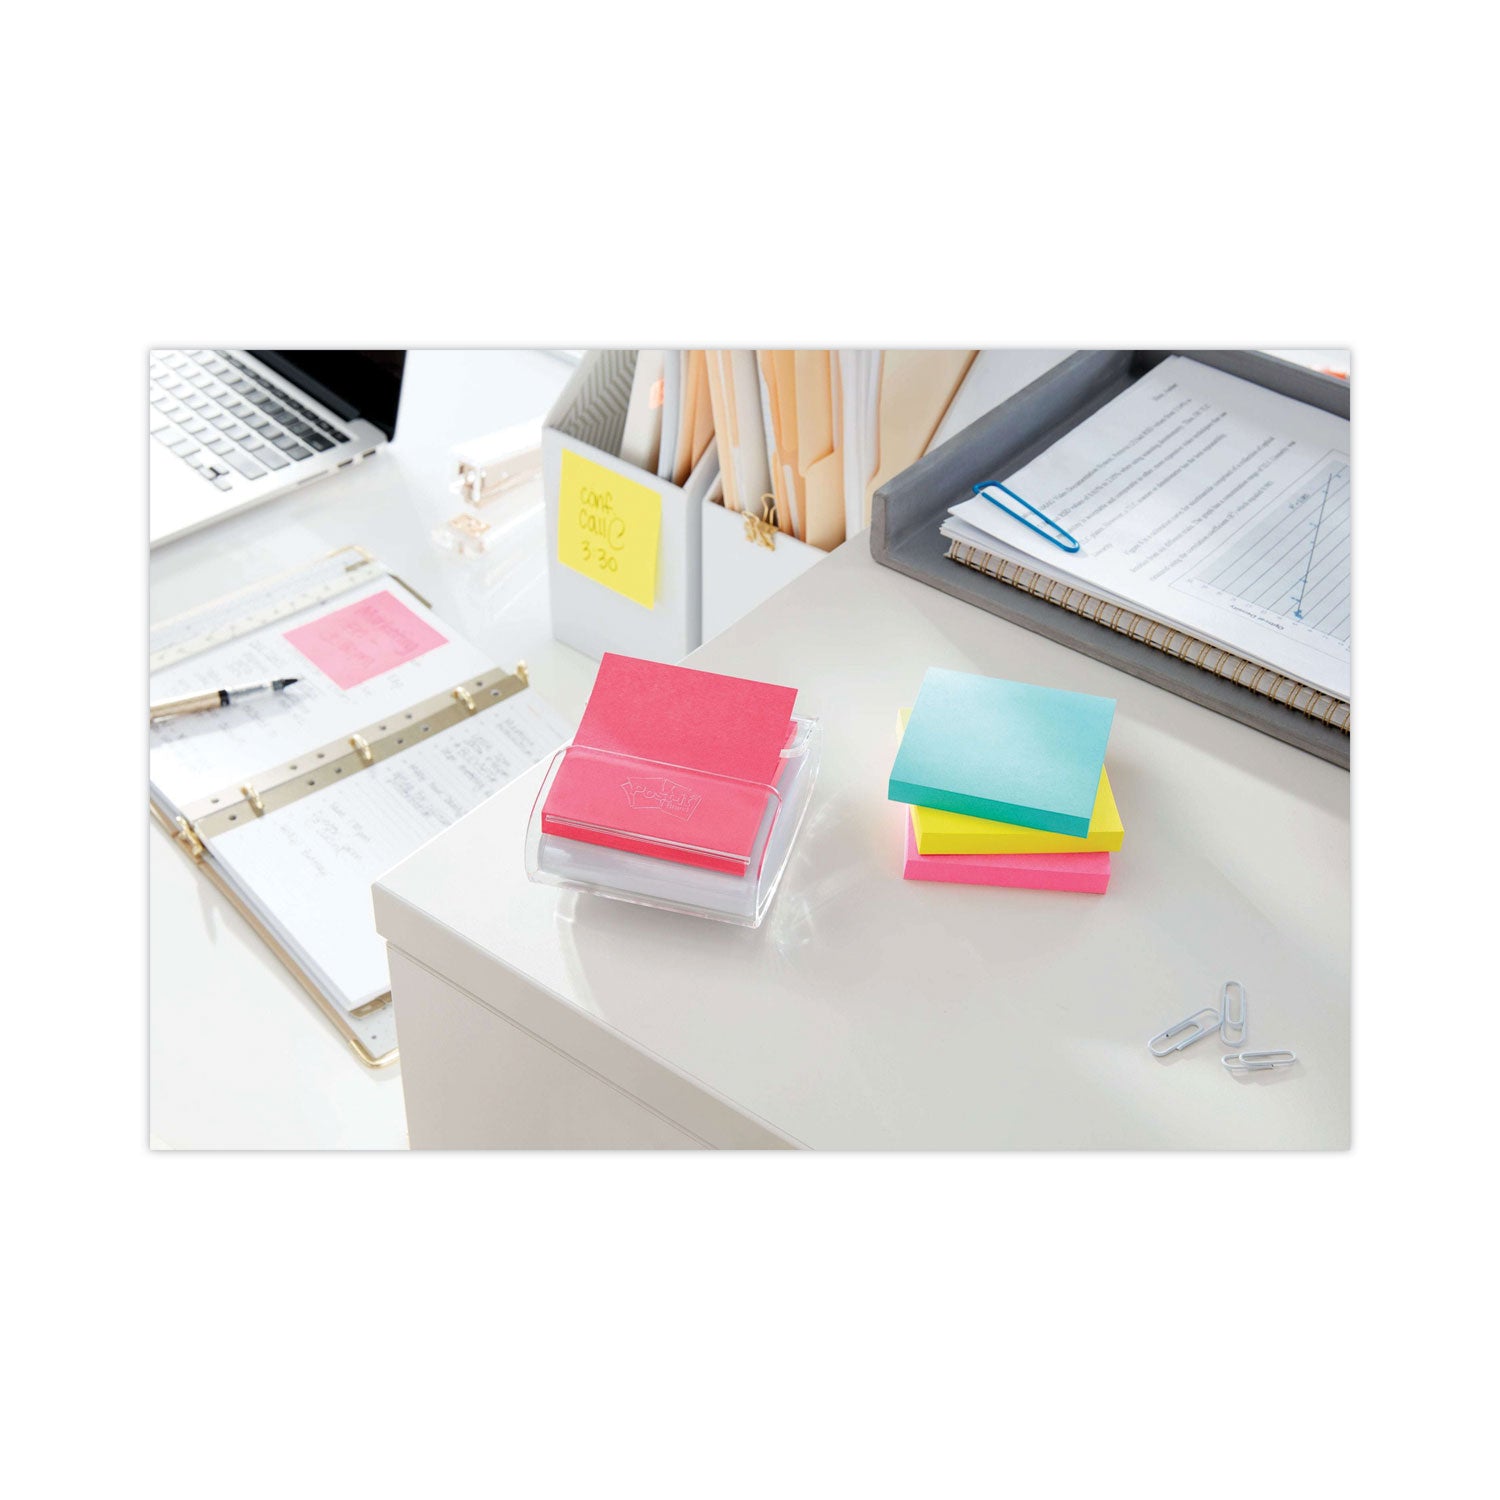 pop-up-3-x-3-note-refill-cabinet-pack-3-x-3-supernova-neons-collection-colors-100-sheets-pad-18-pads-pack_mmmr33018ssmiac - 7